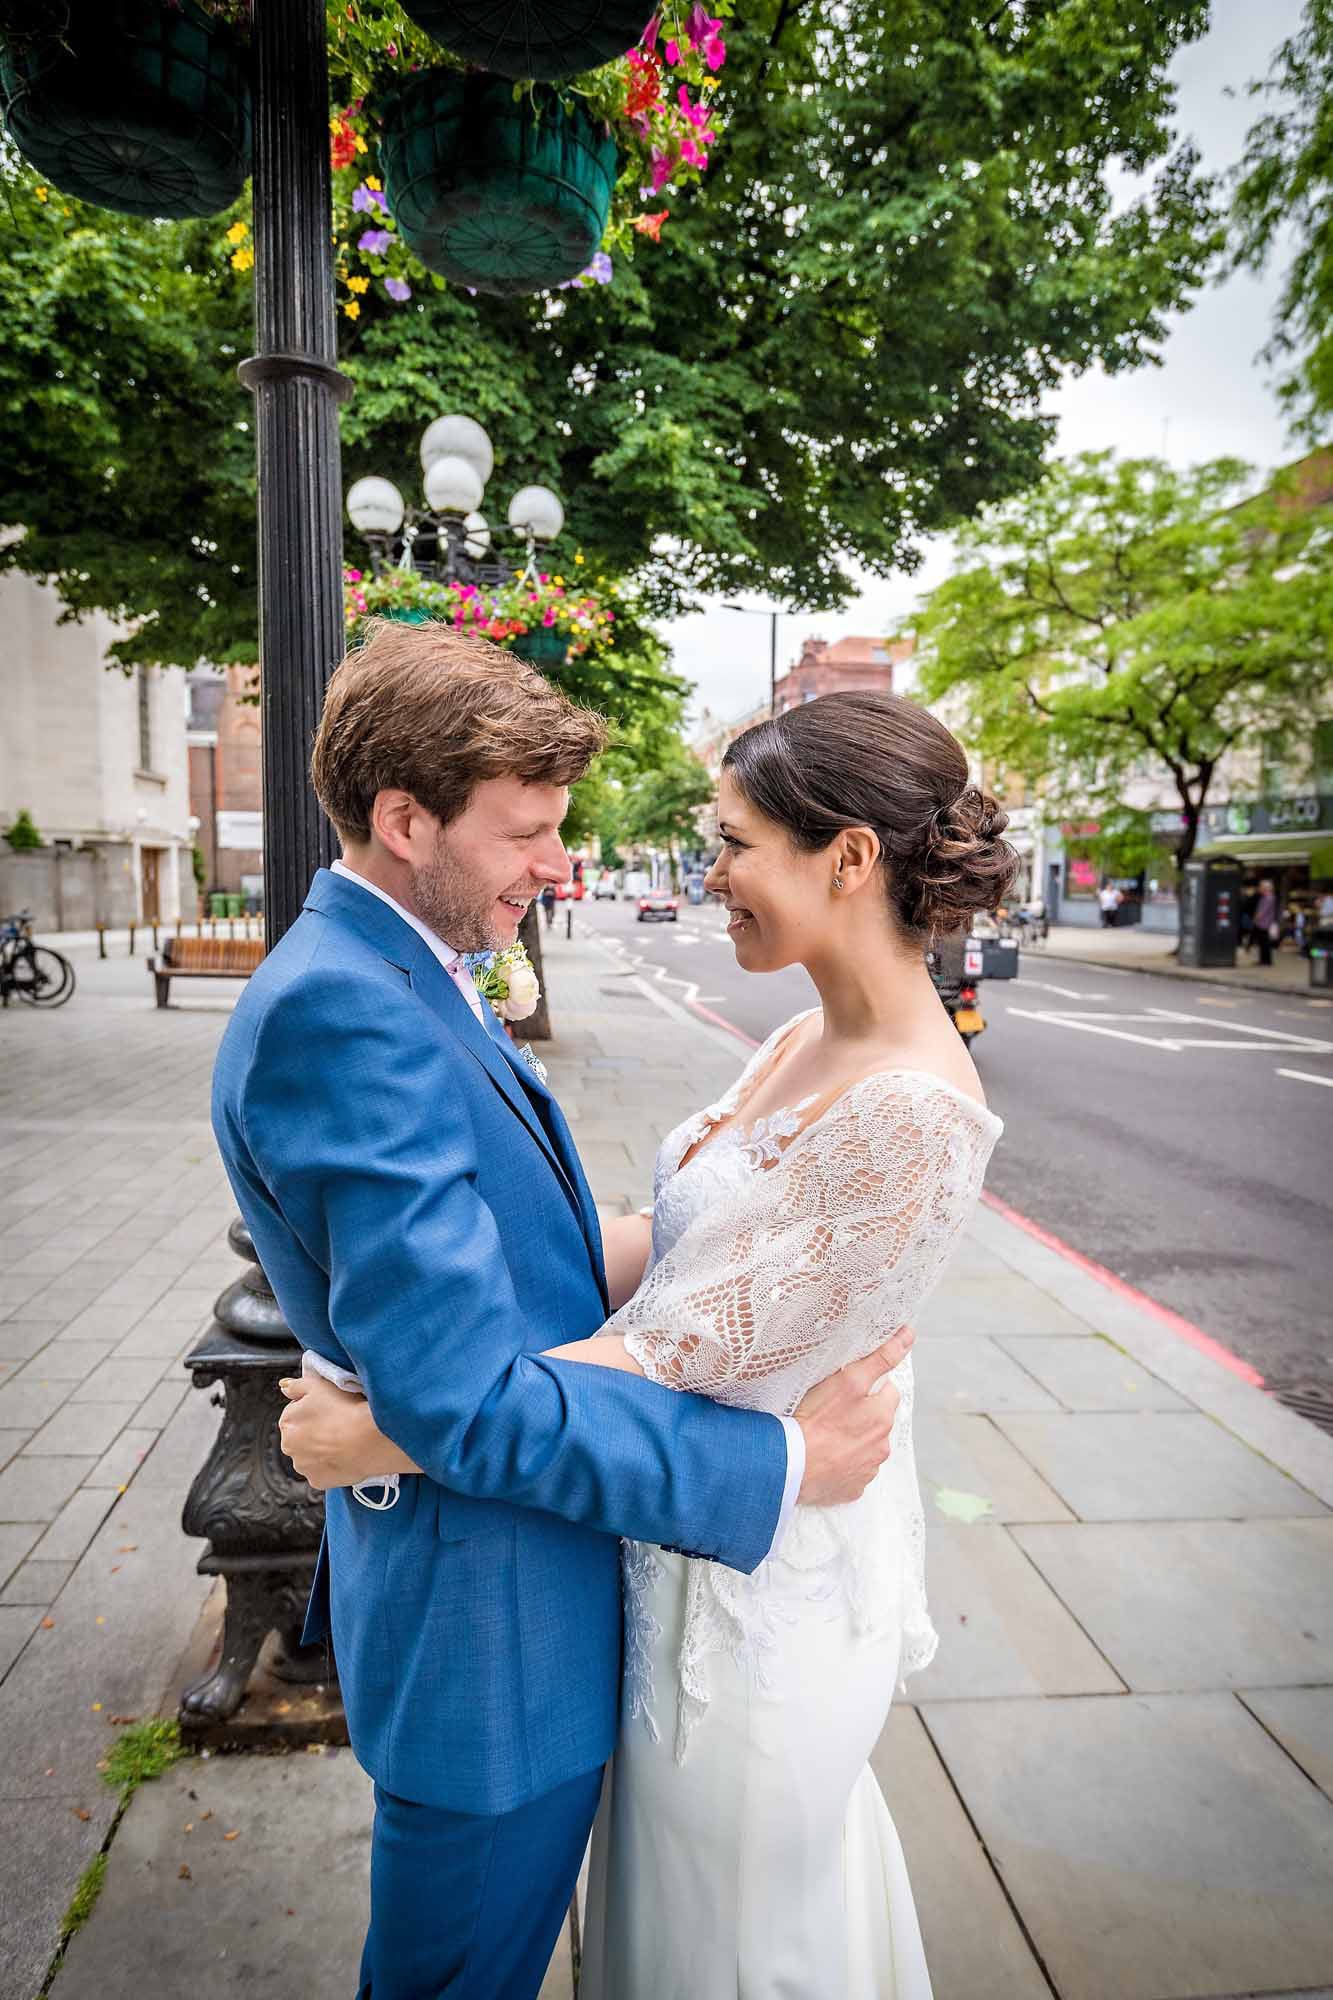 The bride and groom greet each other in an embrace on Upper Street, Islington